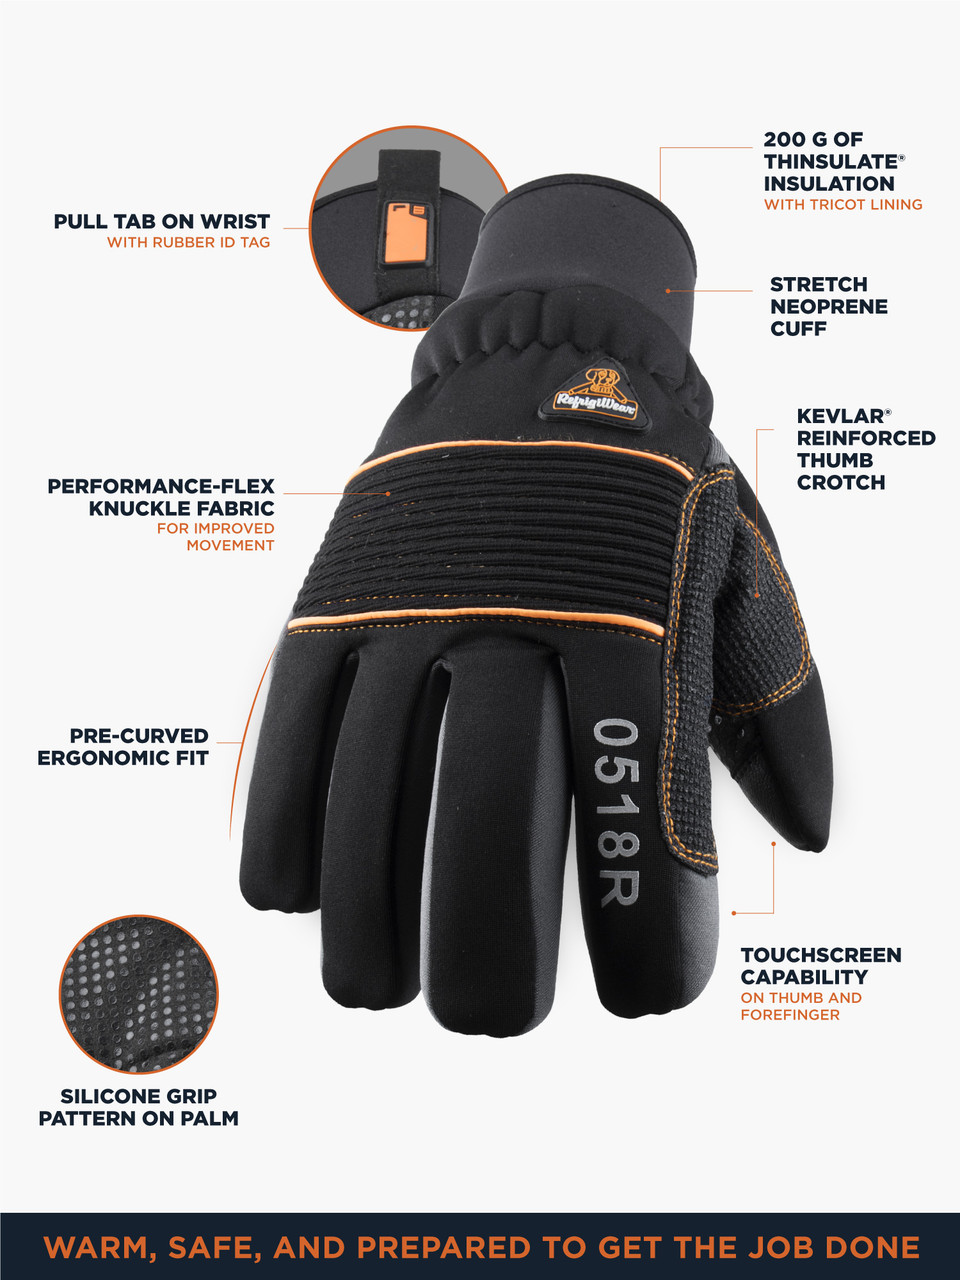 https://cdn11.bigcommerce.com/s-2o3gsghf8c/images/stencil/1280x1280/products/1247/3525/0518-200G-Thinsulate-Insulated-Lined-PolarForce-Gloves-with-Grip-Assist---Black__15787.1682360013.jpg?c=1